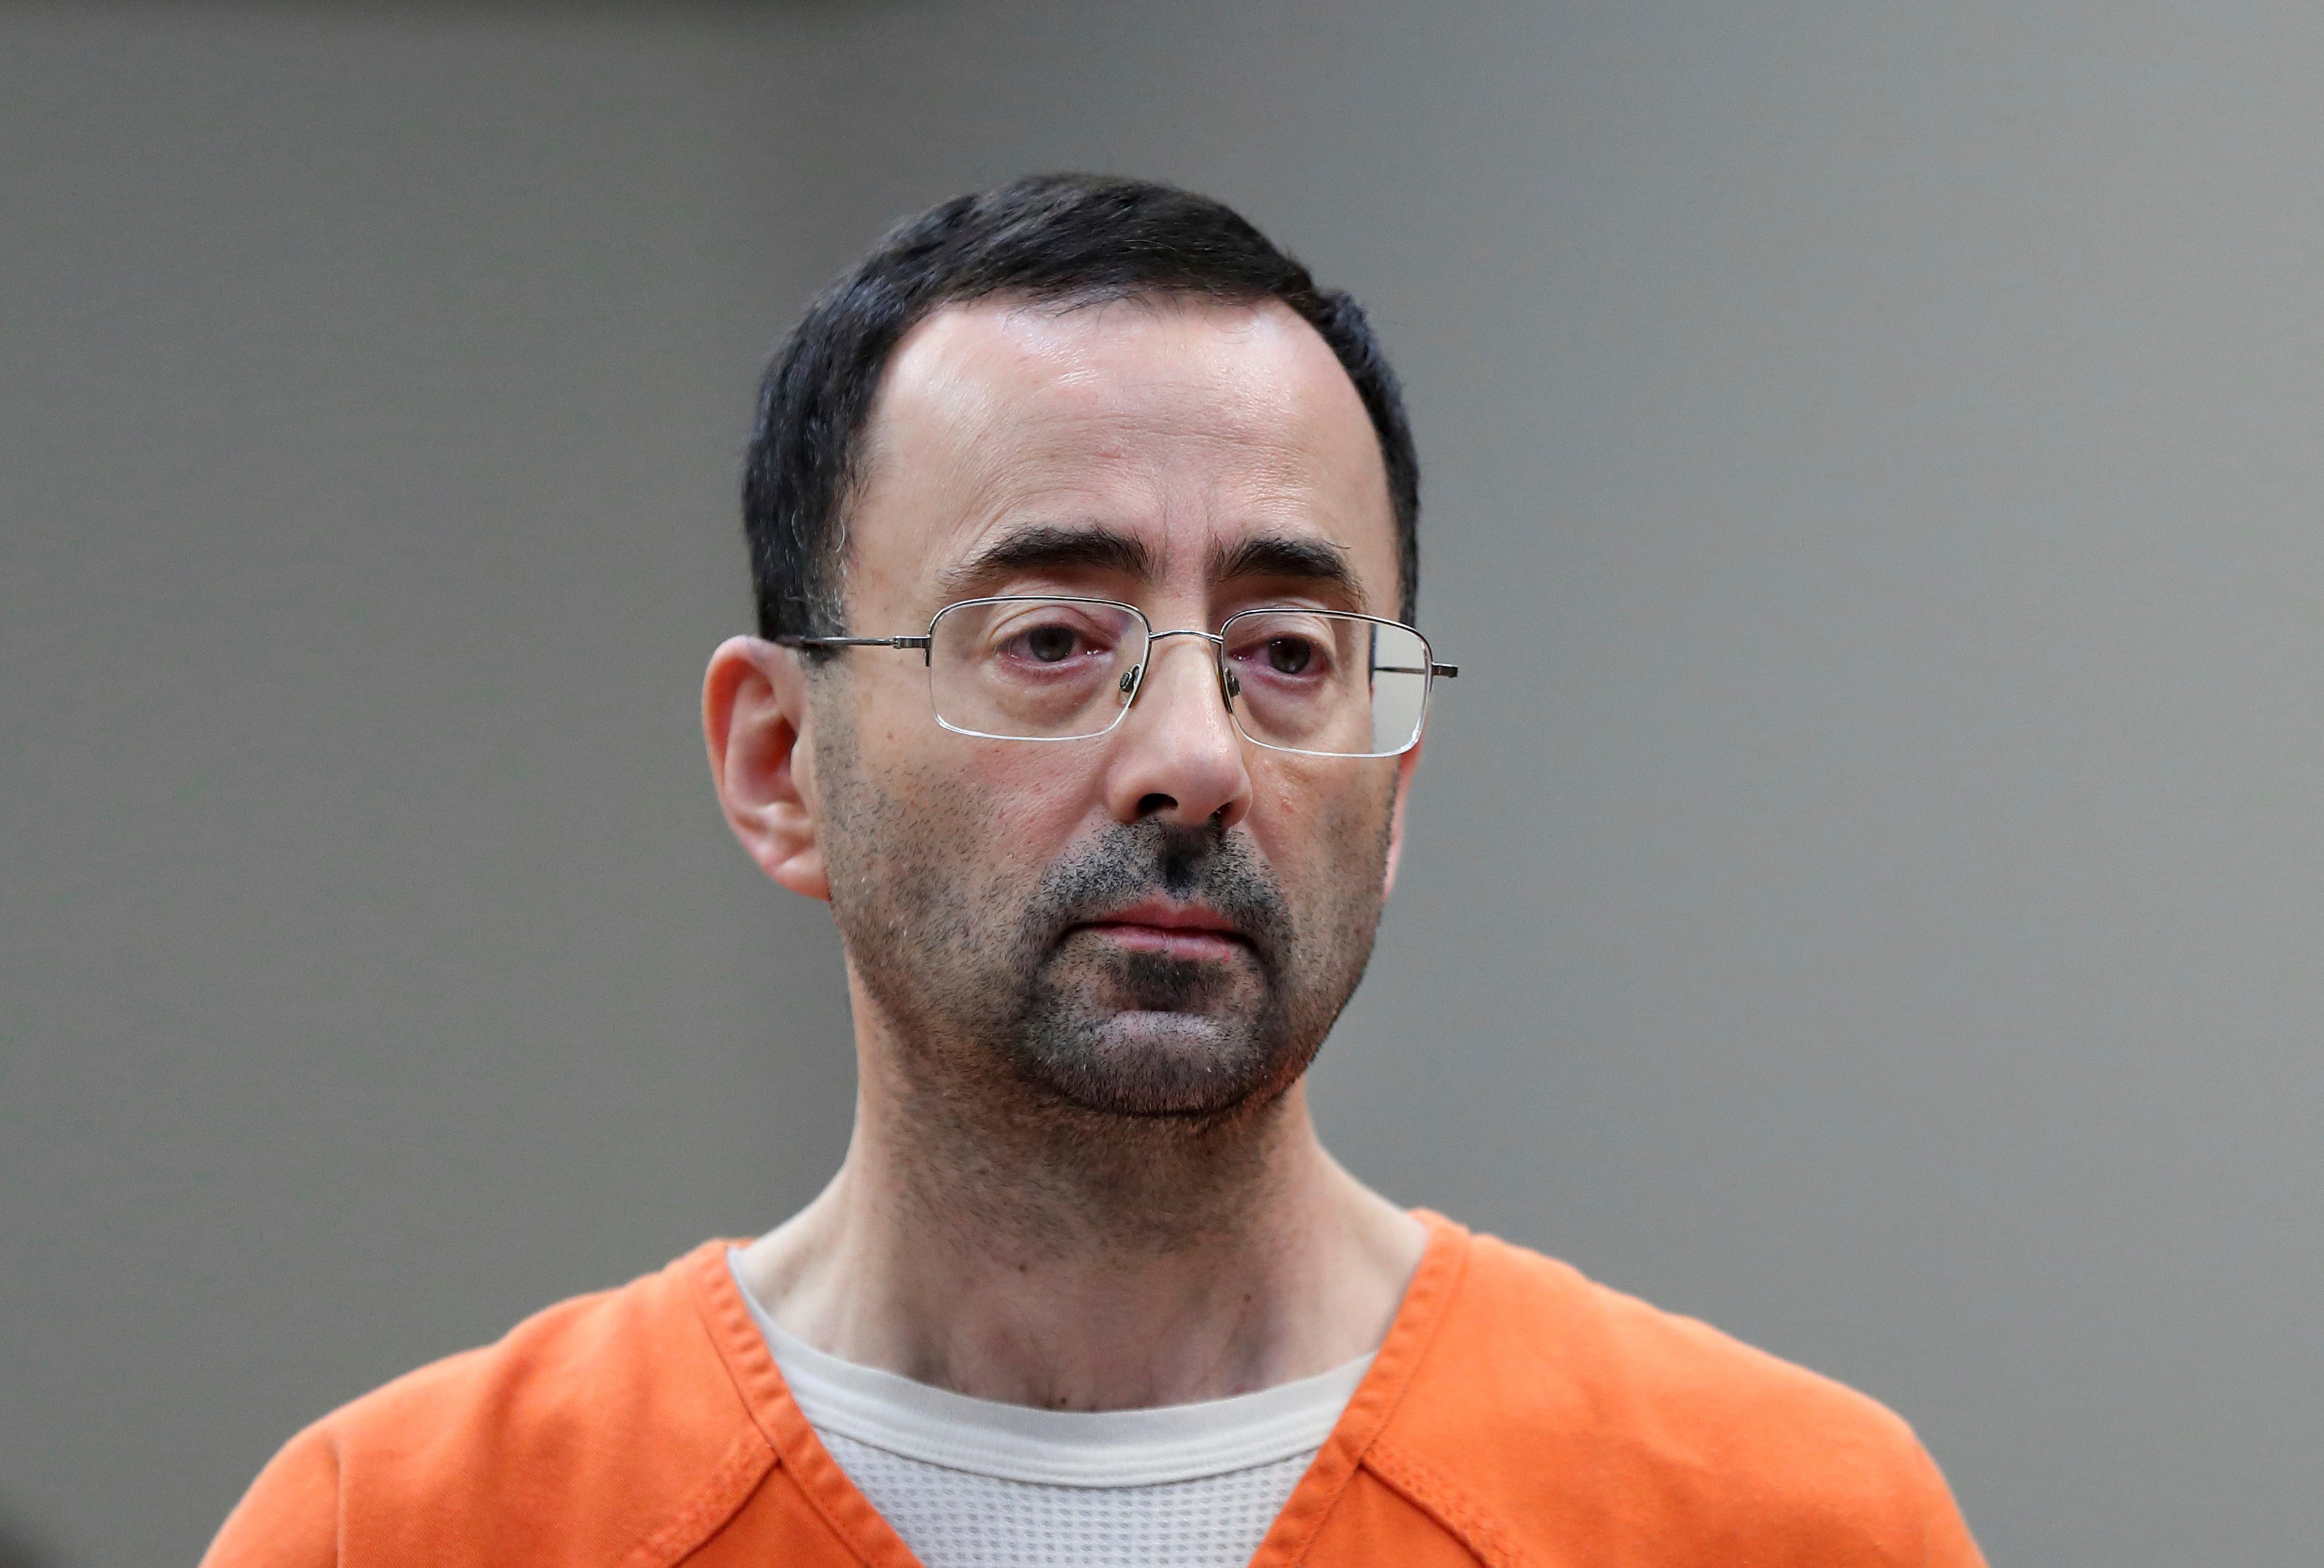 The US Justice Department said Thursday, May 26, 2022 it will not pursue criminal charges against former FBI agents who failed to quickly open an investigation of sports doctor Larry Nassar despite learning in 2015 that he was accused of sexually assaulting female gymnasts